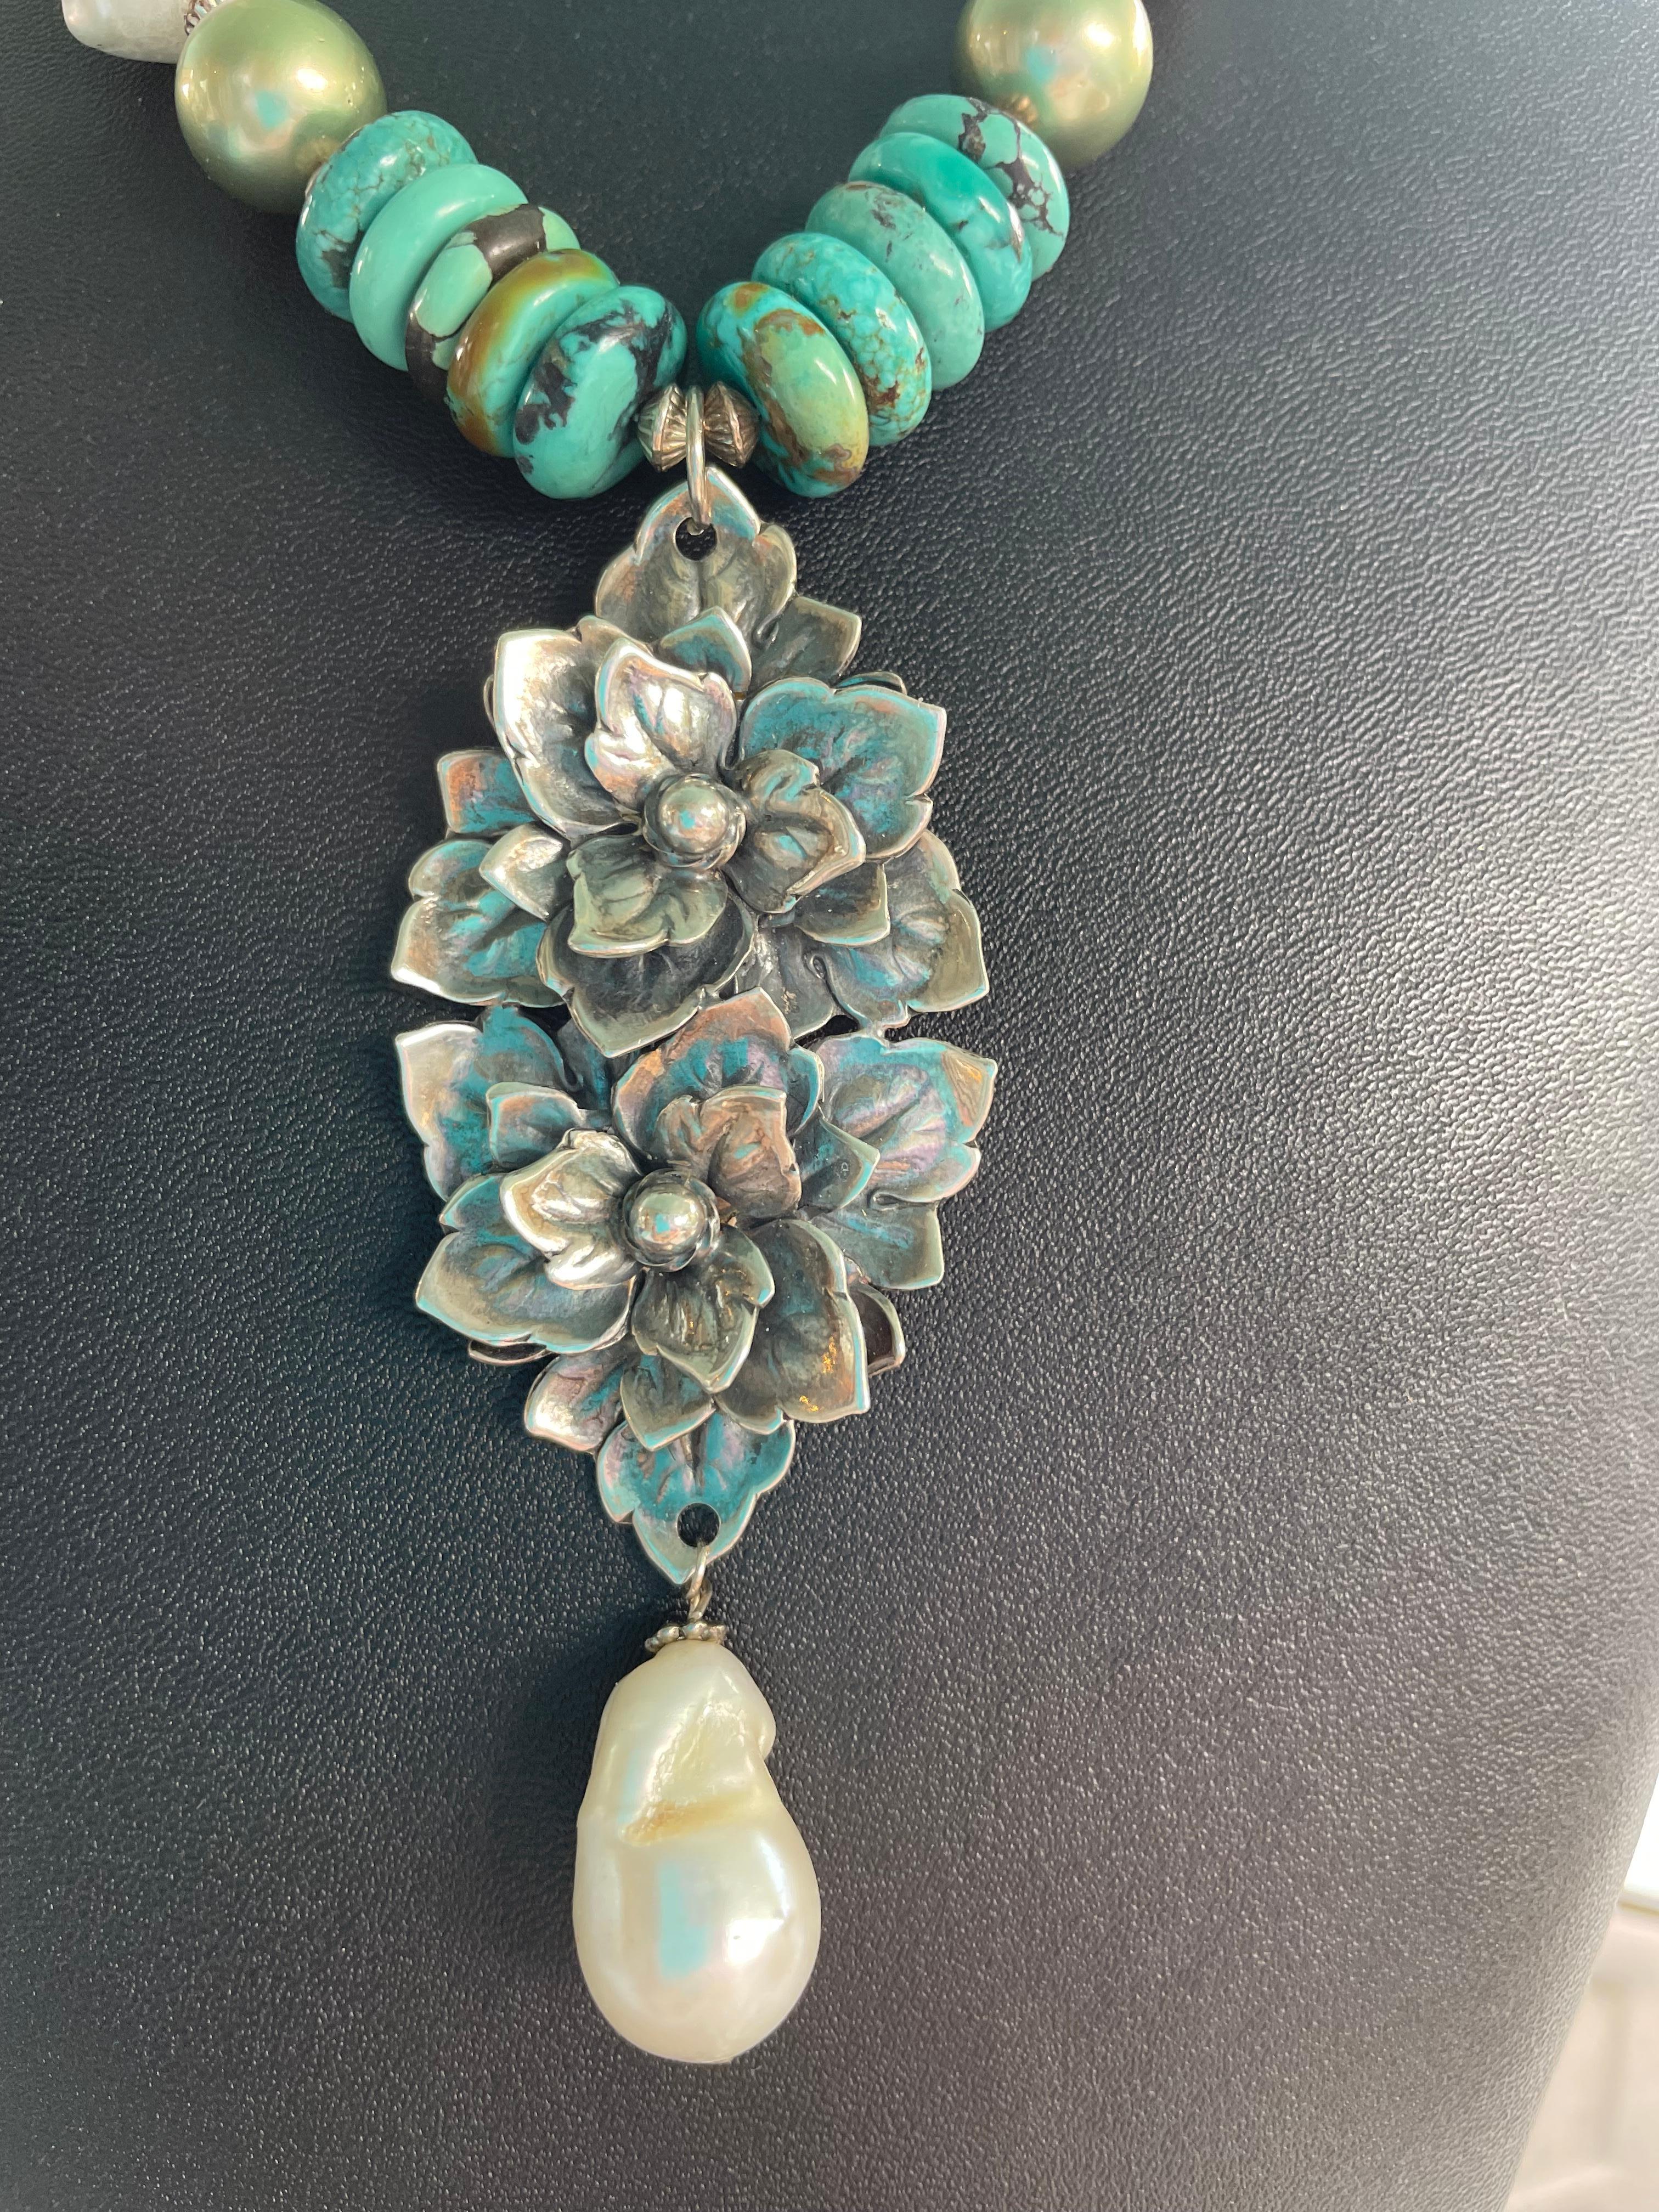 This one of a kind,handmade,necklace features a vintage Hobe sterling silver brooch as its’ centerpiece. It hangs from a strand of baroque pearls, Kingman turquoise discs, vintage sterling Mexican beads and vintage faceted sterling beads. Also has a